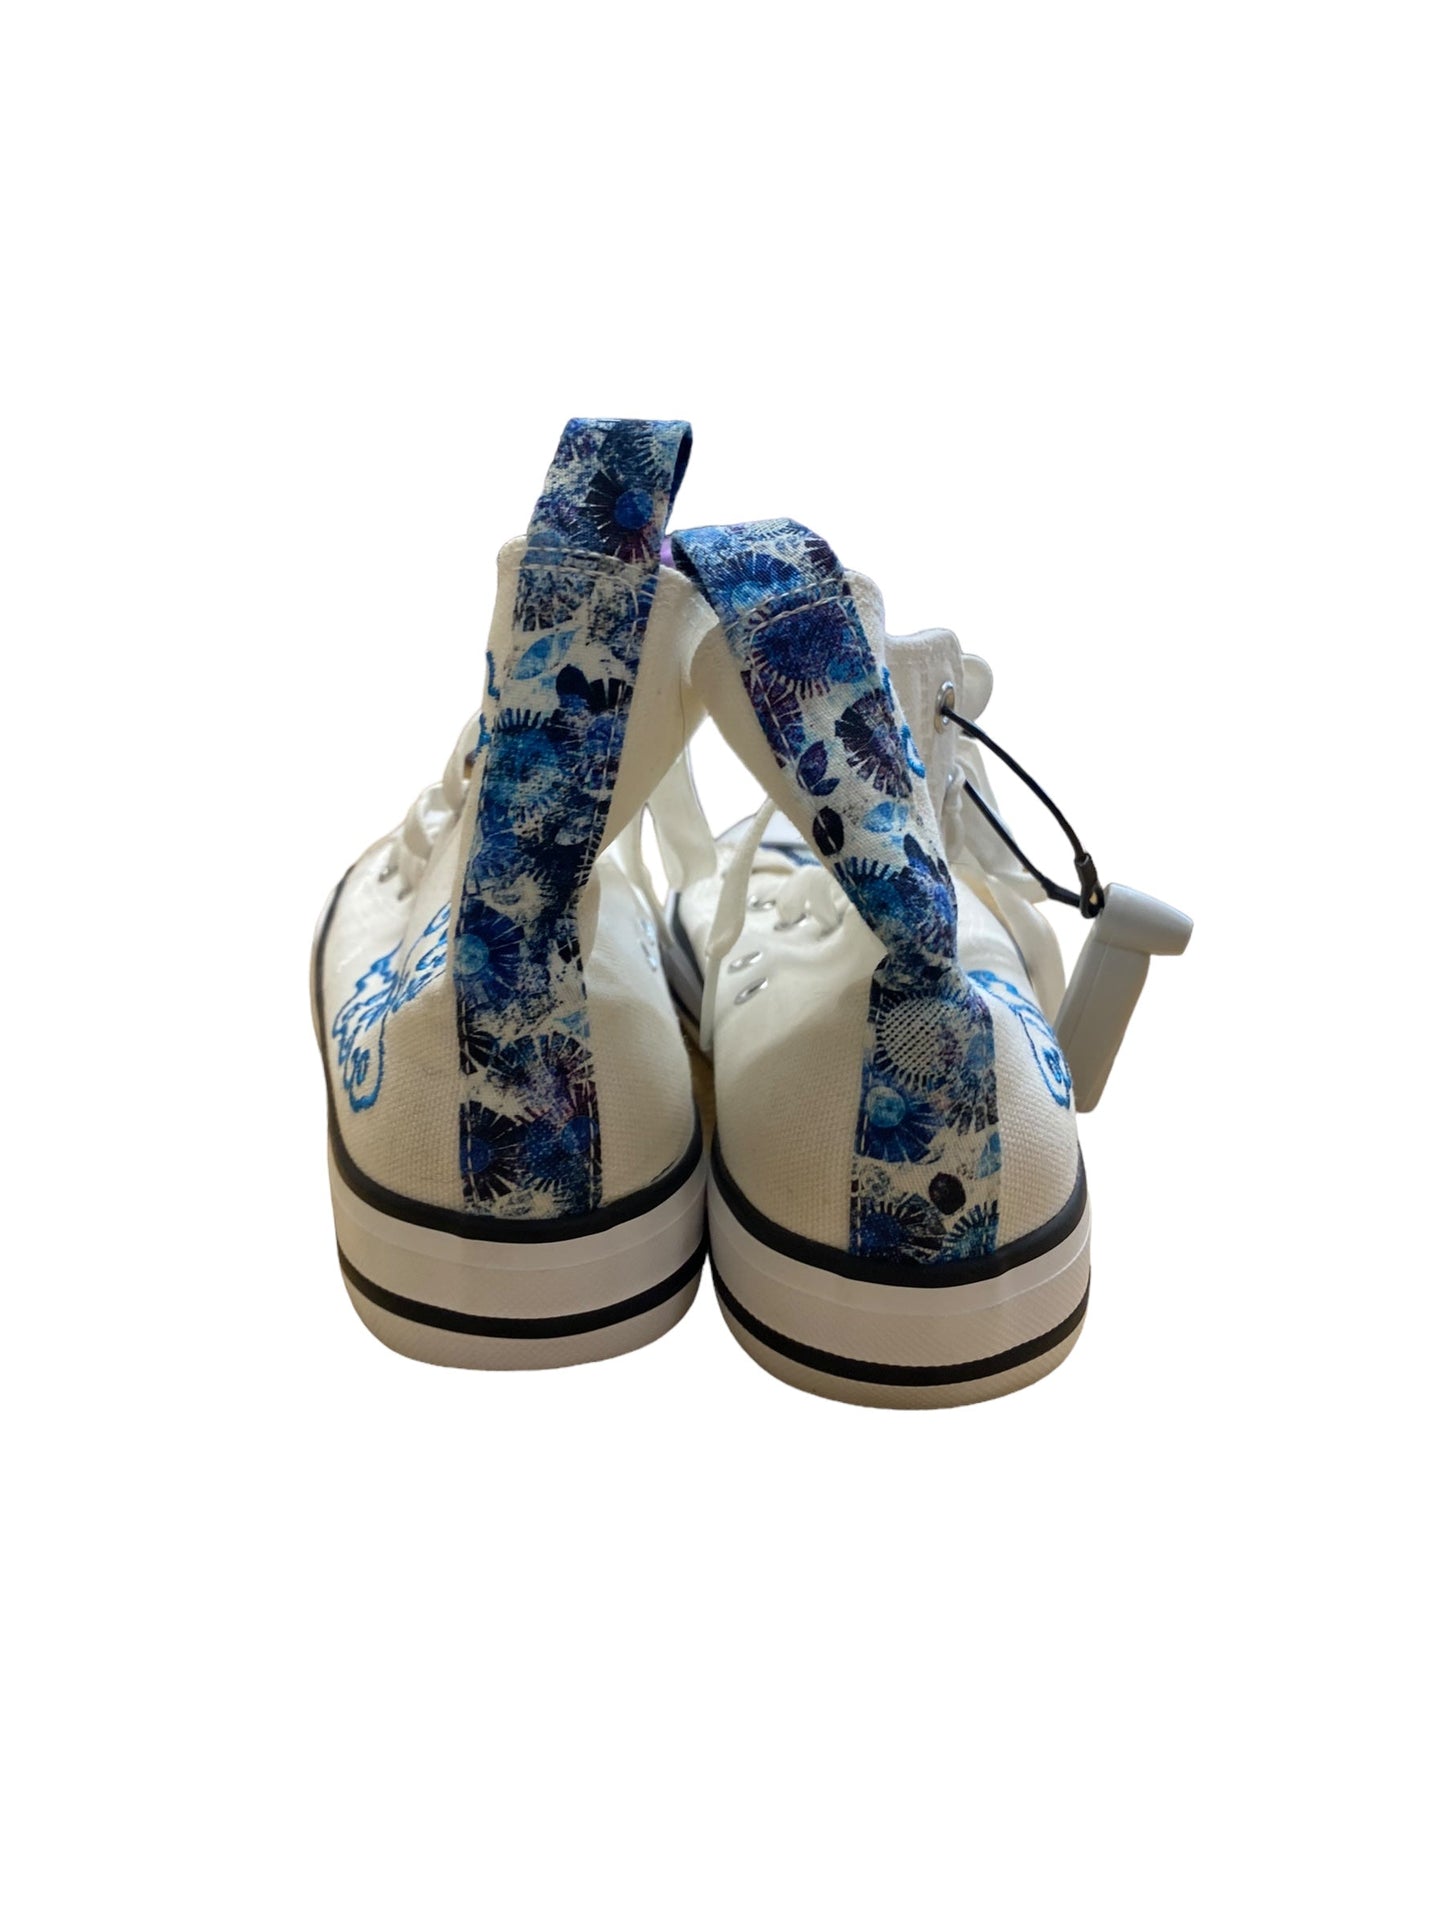 Blue & White Shoes Sneakers Clothes Mentor, Size 7